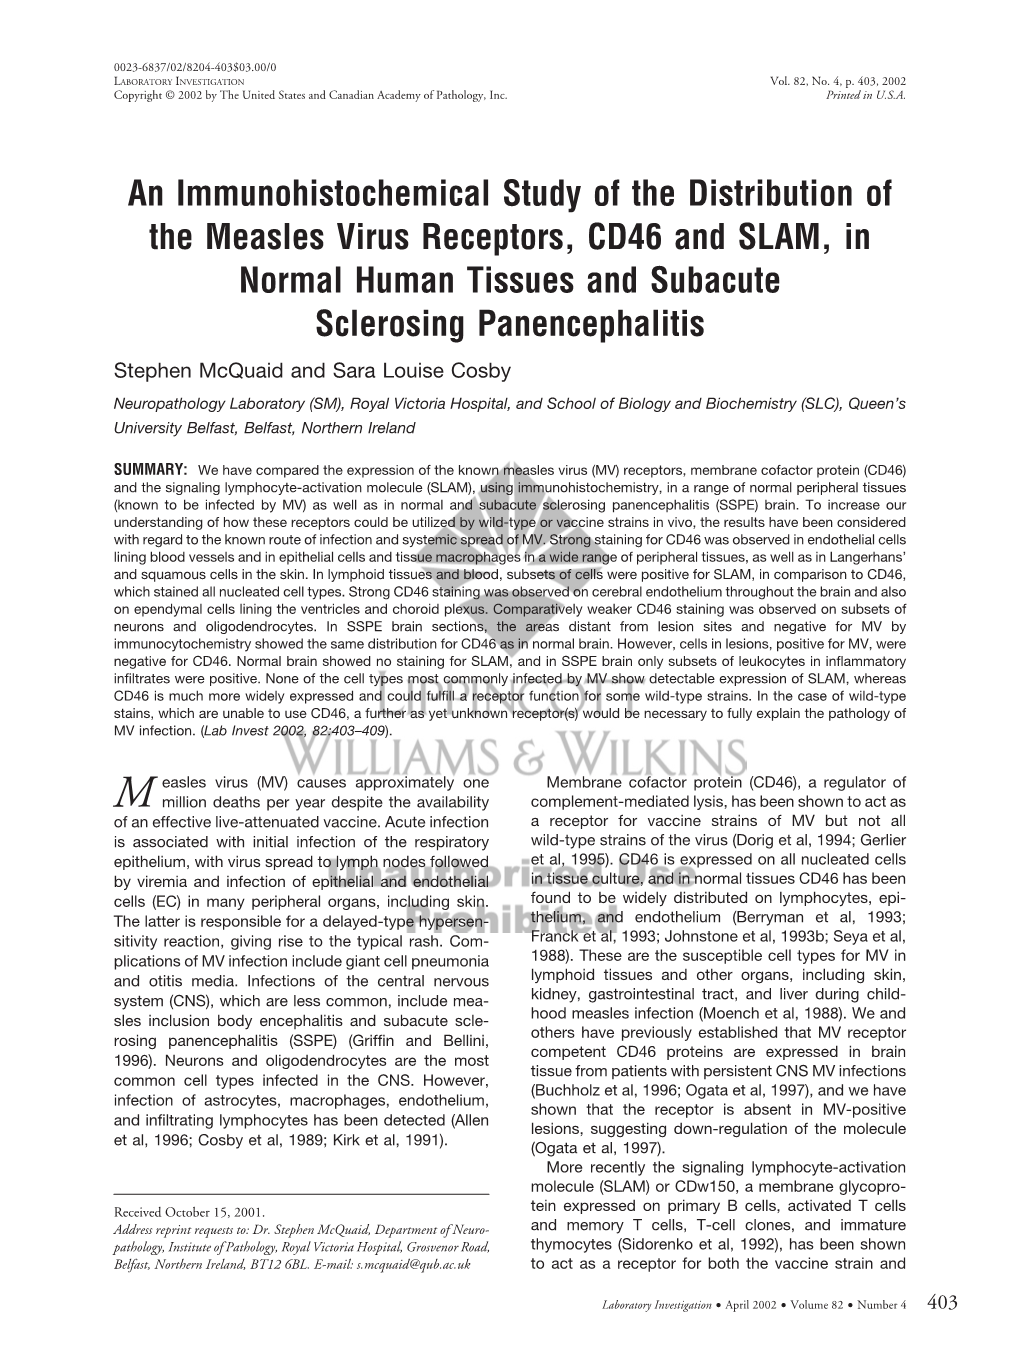 An Immunohistochemical Study of the Distribution of the Measles Virus